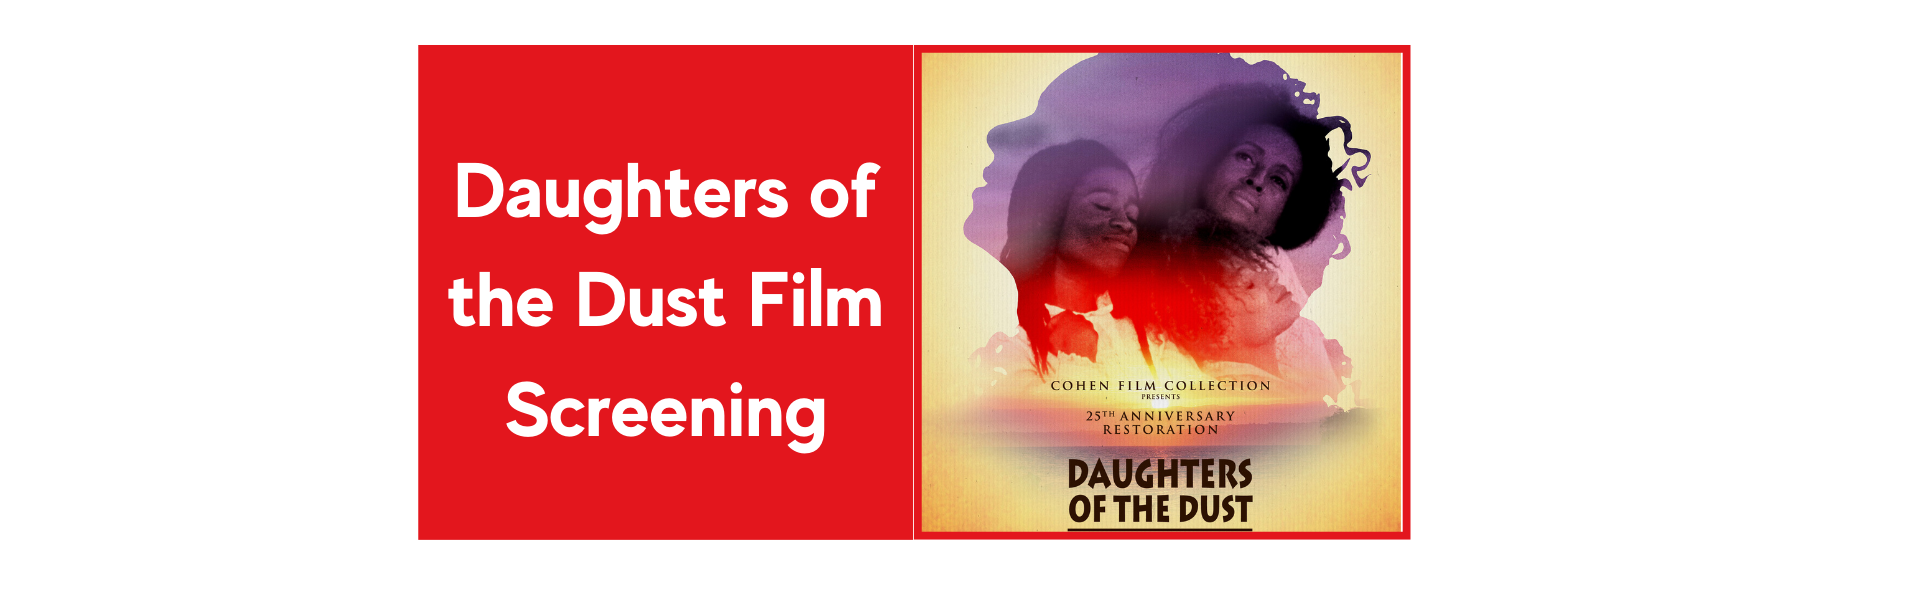 Daughters-of-the-Dust-Film-Screening.png